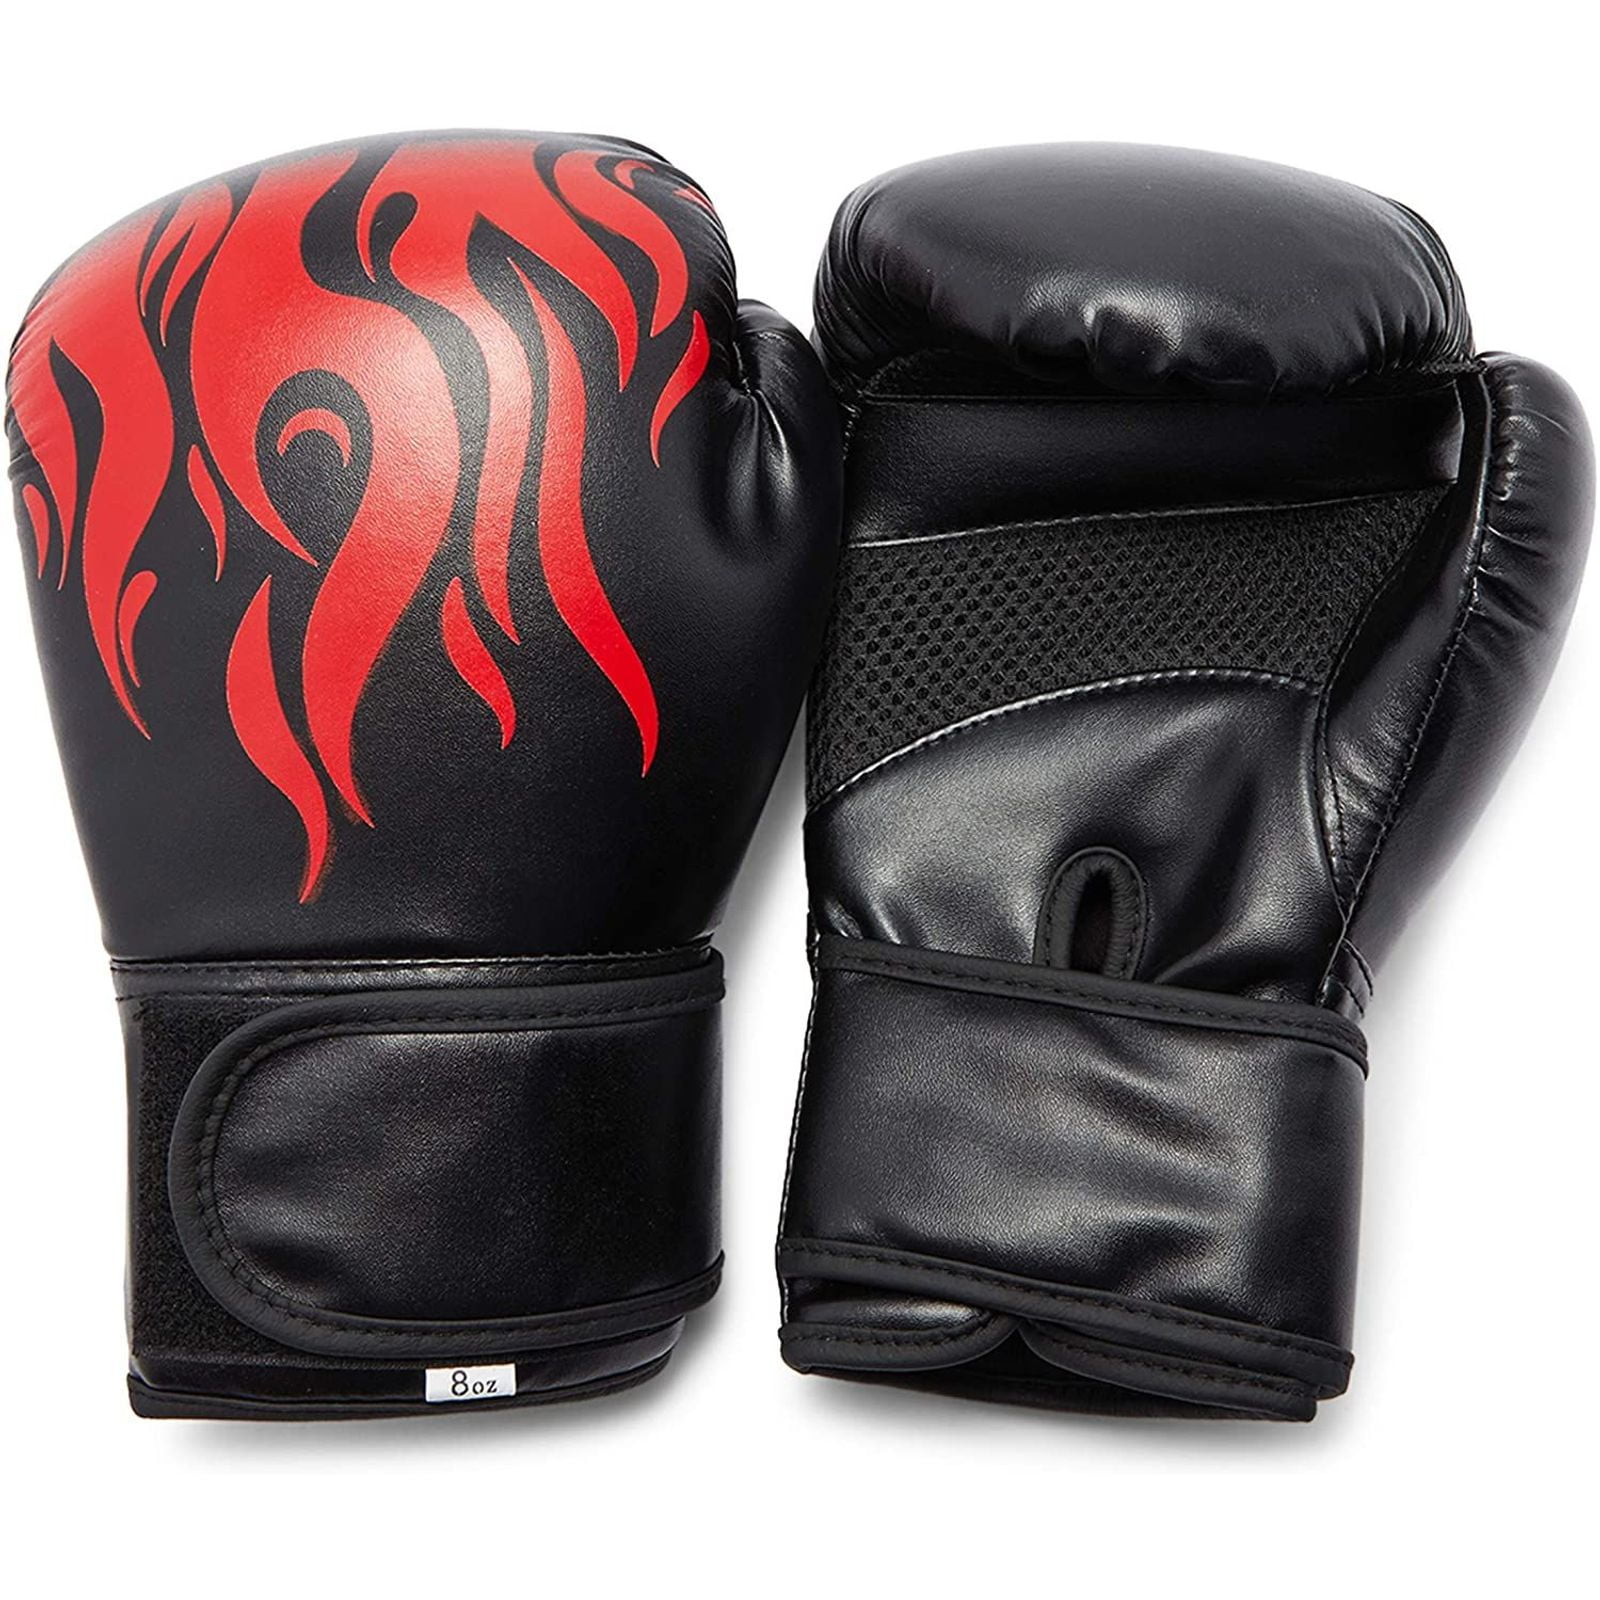 Bad Boy MMA Pro Series Leather Boxing Gloves Black/Red Kick Punch Mitts Sparring 